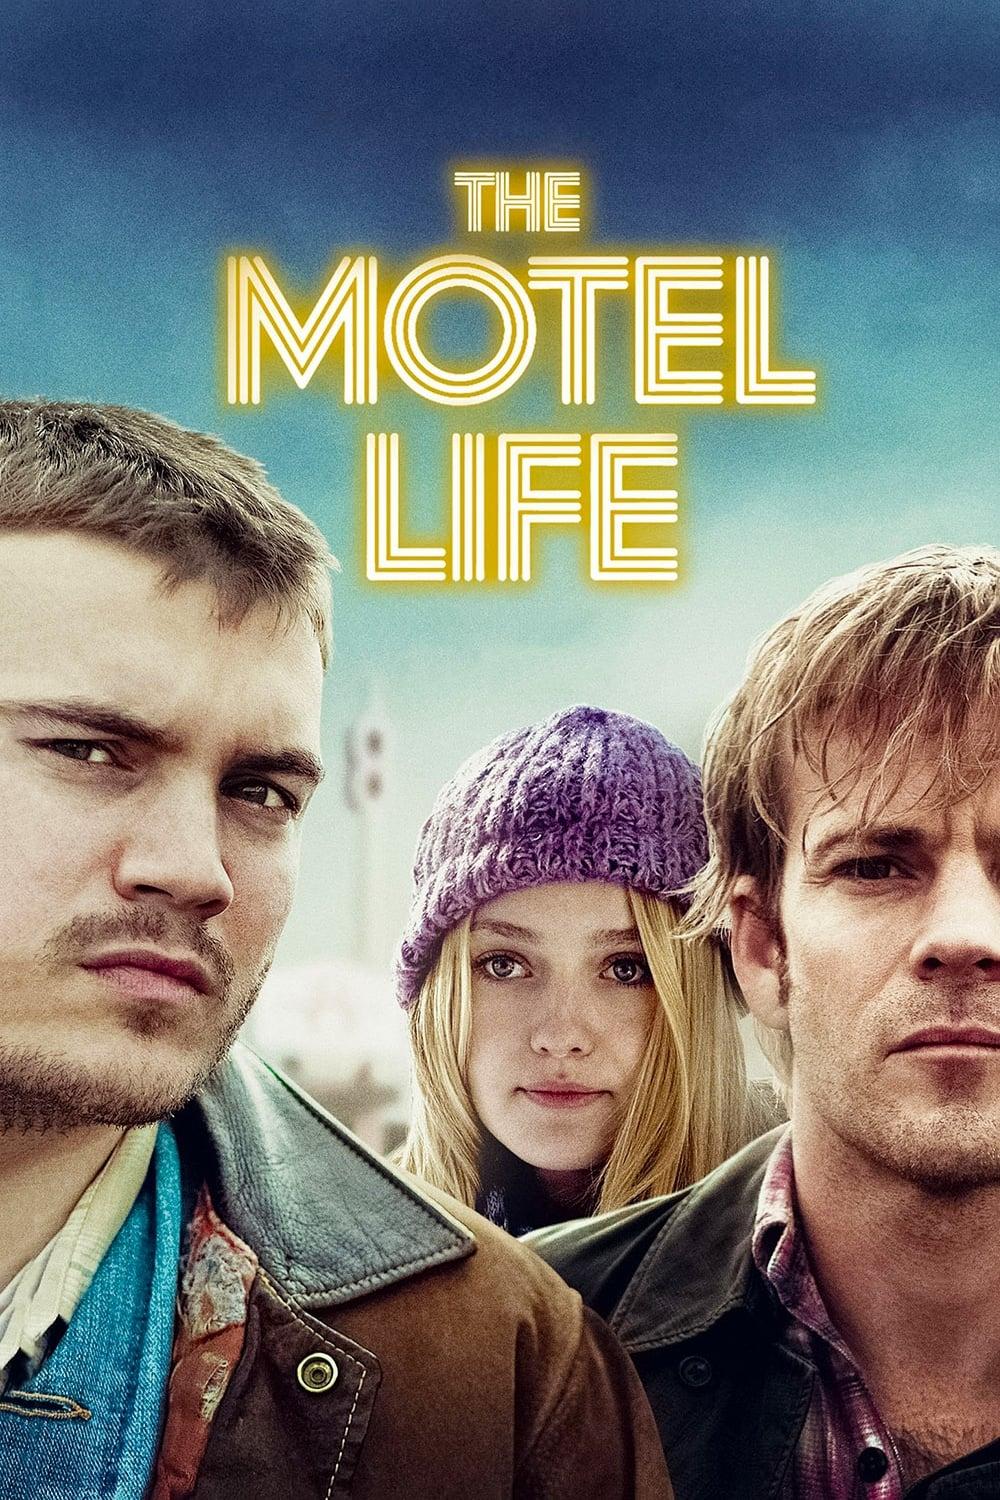 The Motel Life poster